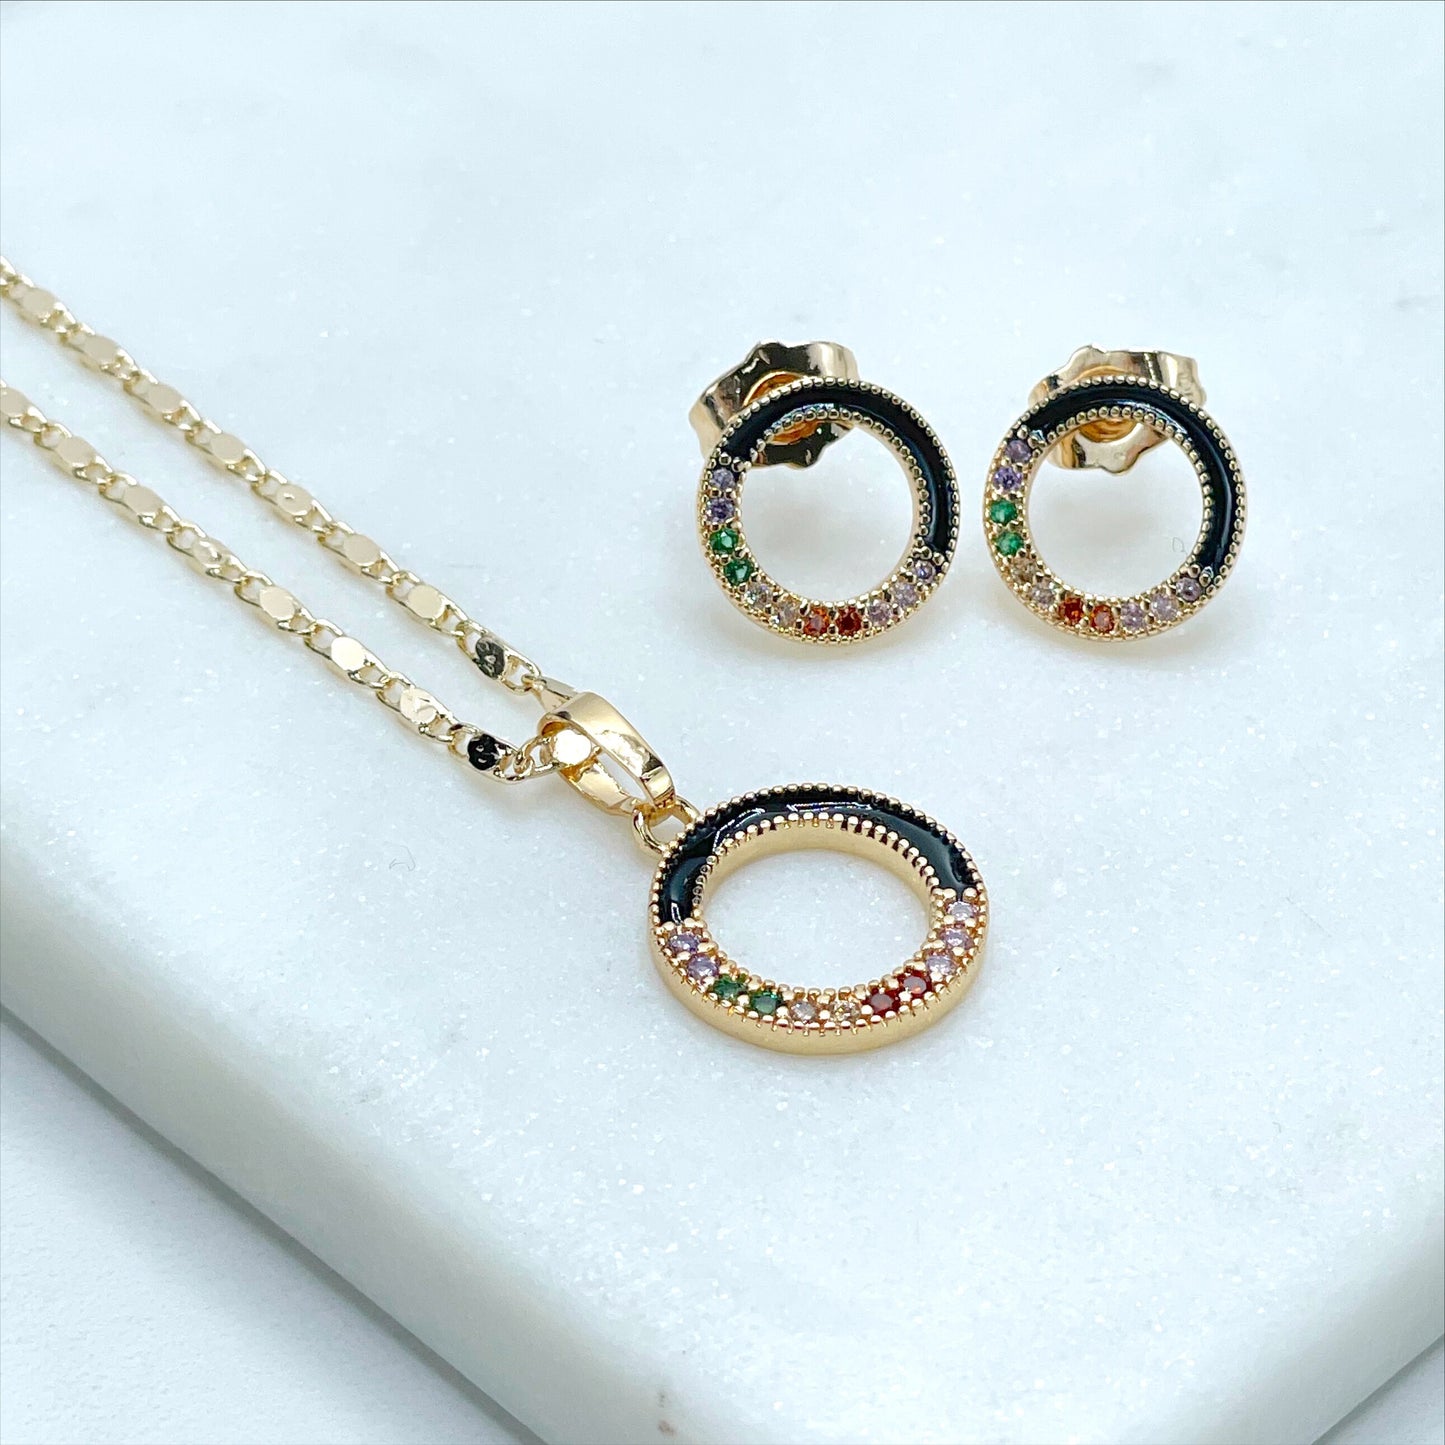 18k Gold Filled 1.5mm Mariner Link Chain with Colored Cubic Zirconia & Black Enamel Charms Necklace and Earrings Set, Wholesale Jewelry